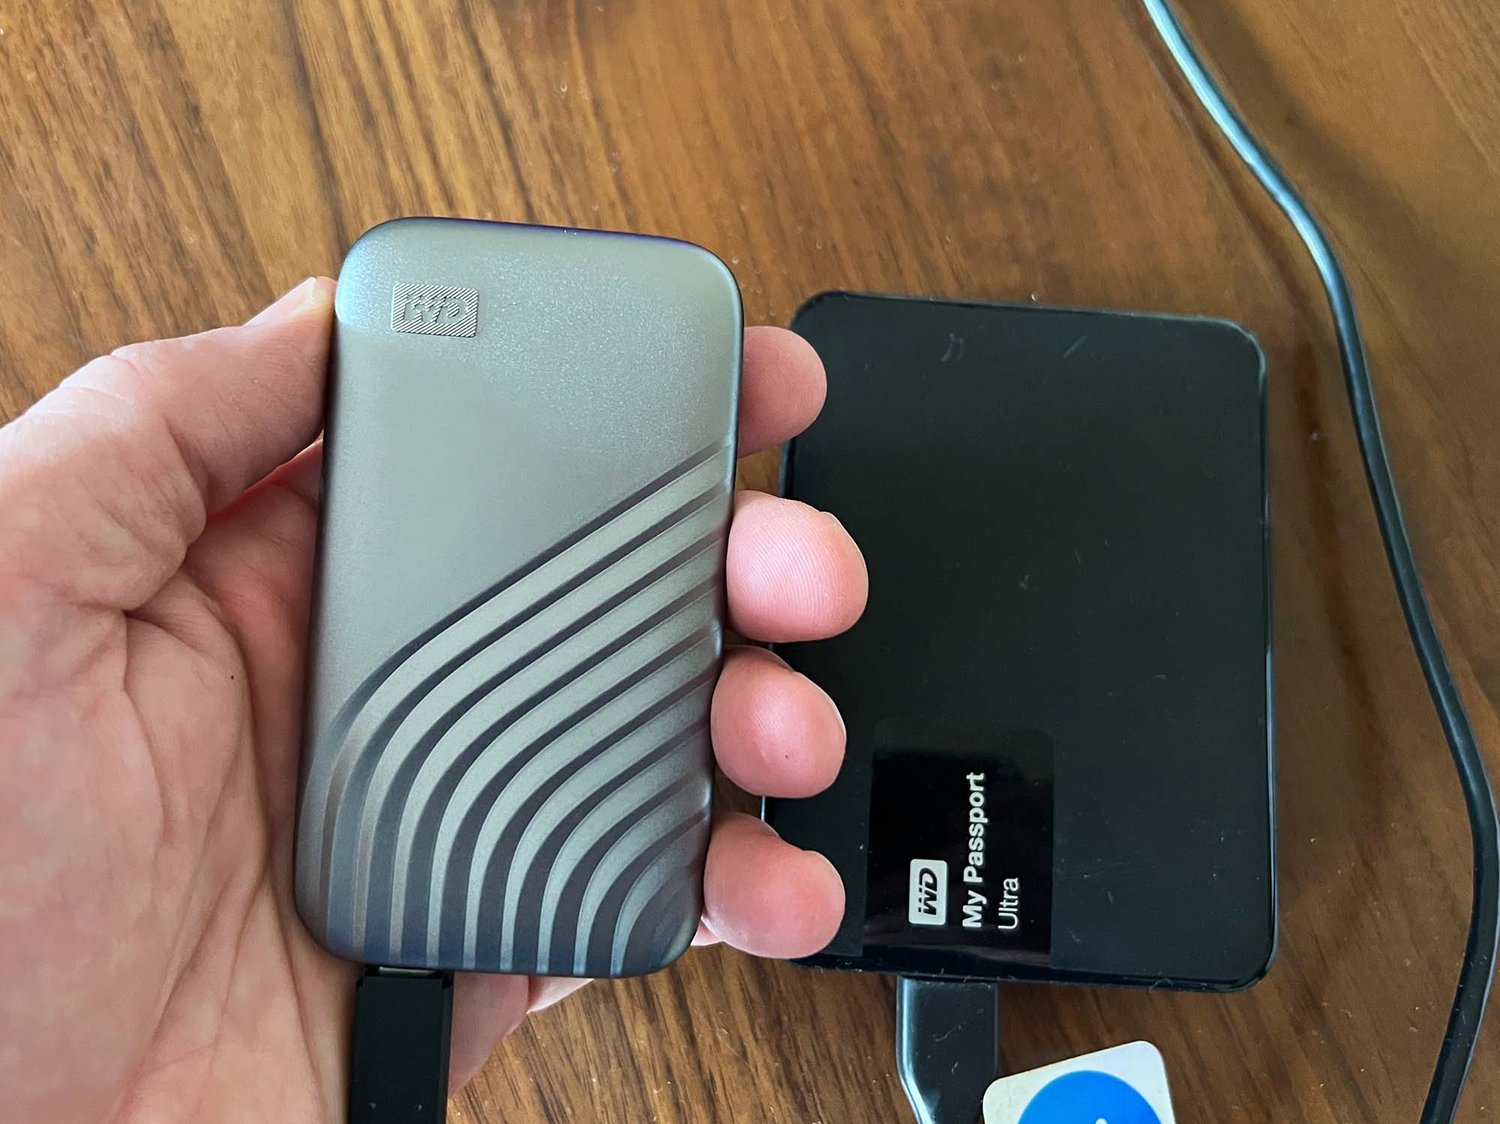 How To Reformat A Wd External Hard Drive